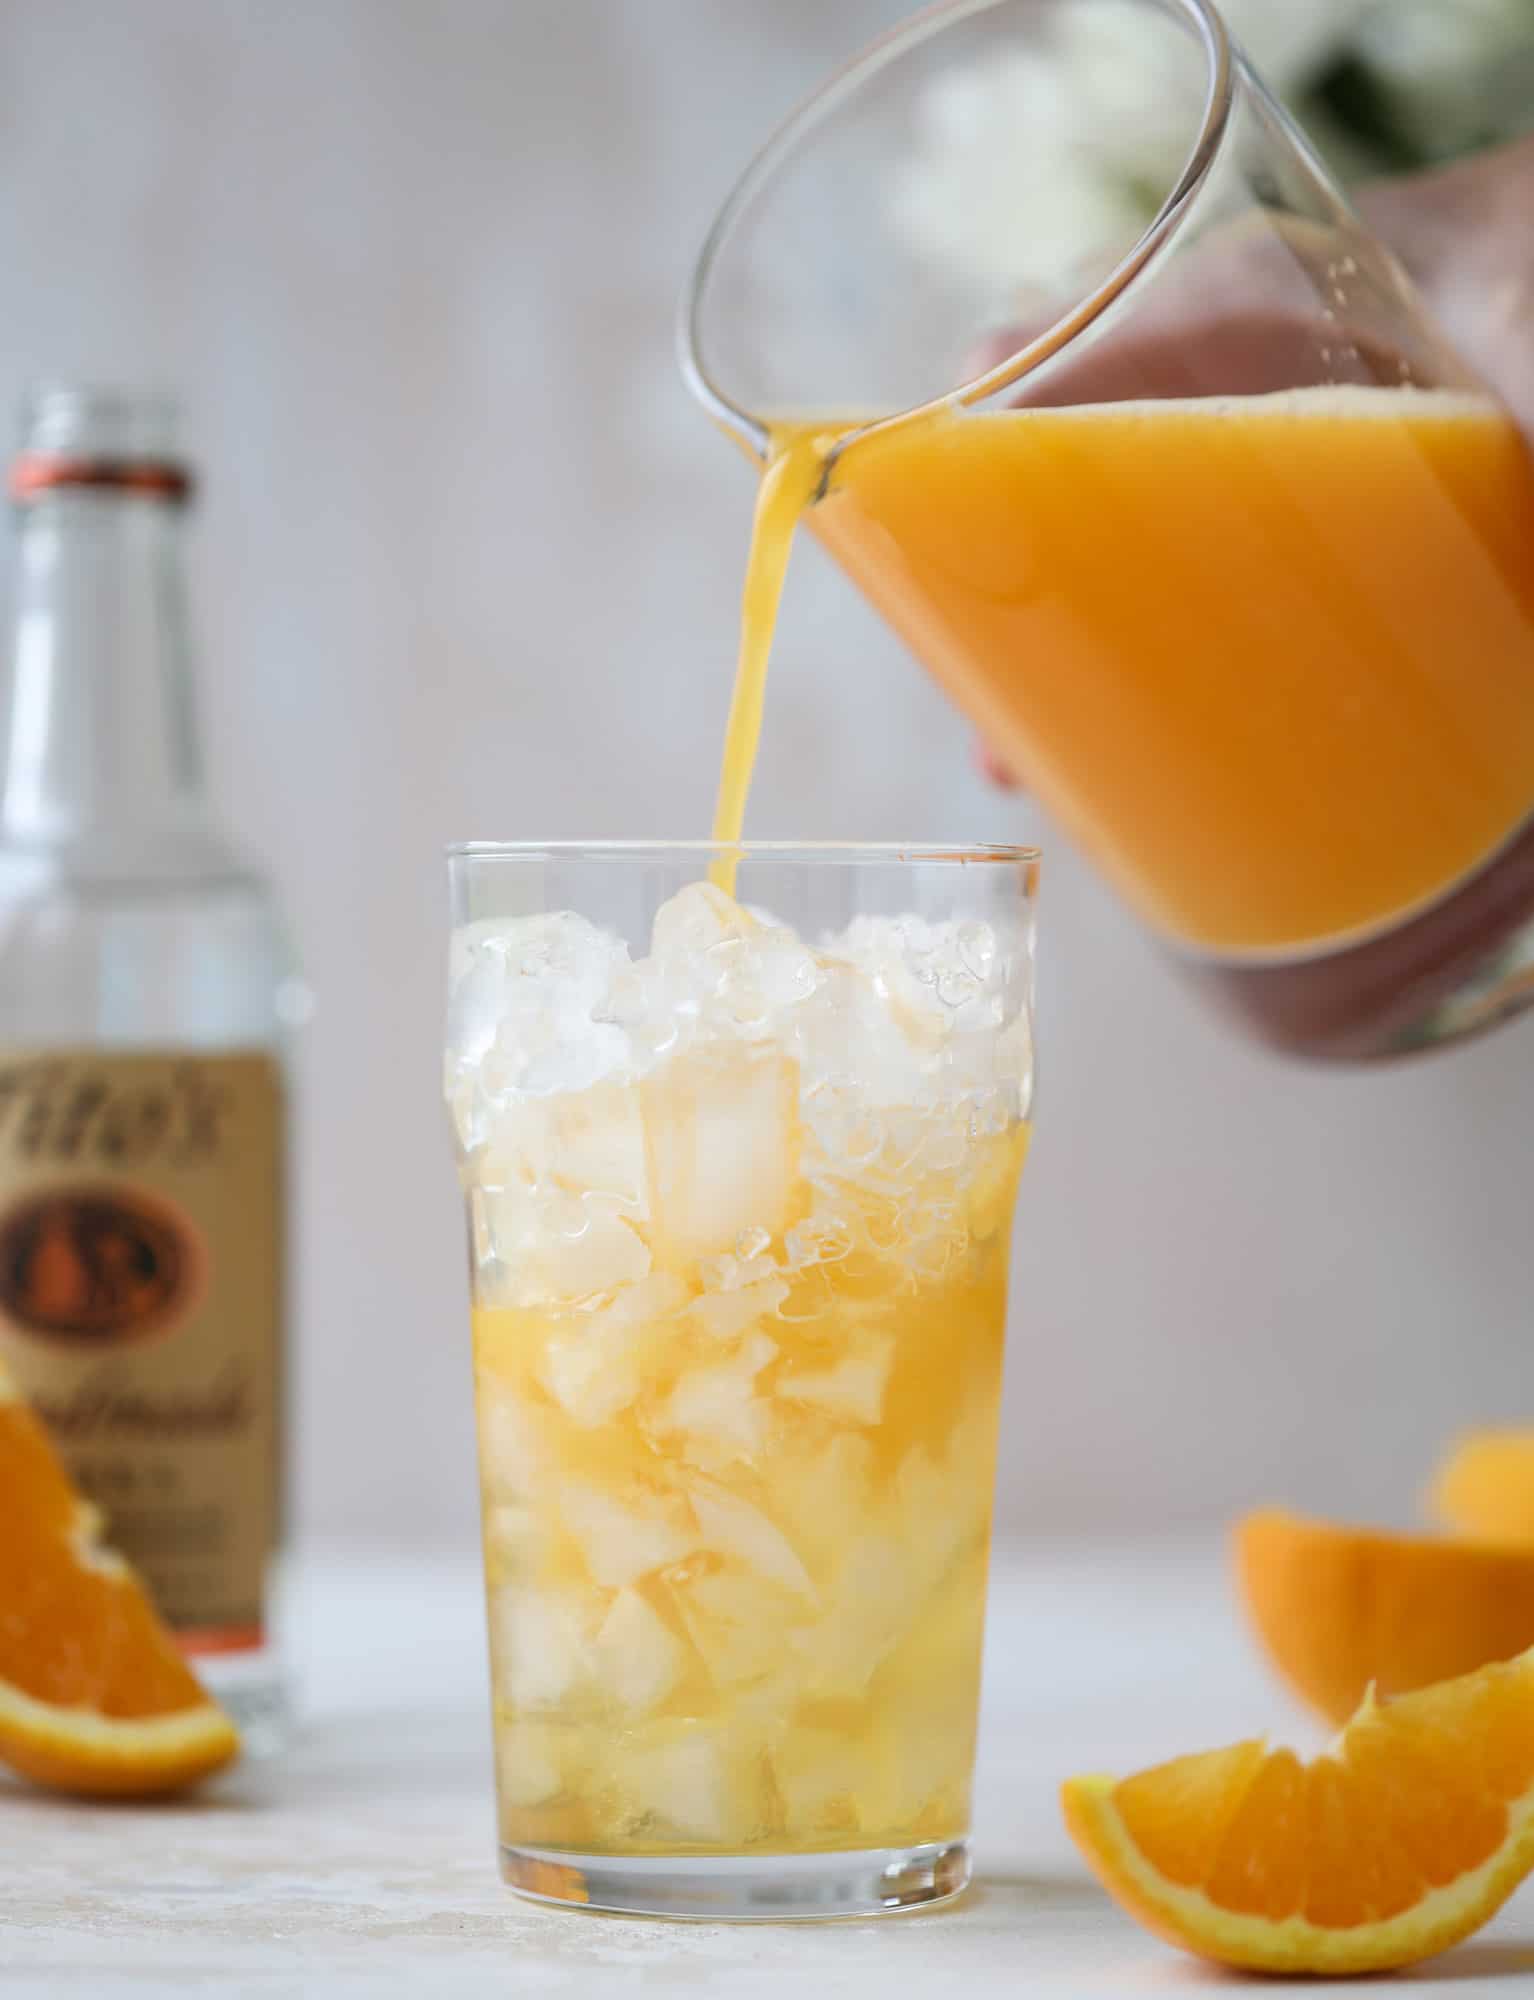 This orange crush is a copycat cocktail from the ones served in Ocean City, Maryland at the beach all summer long! It's one entire freshly squeezed orange with vodka and lemon lime soda and it tastes like heaven. Super refreshing and perfect for summer. I howsweeteats.com #orange #crush #cocktail #ocean #city #vodka